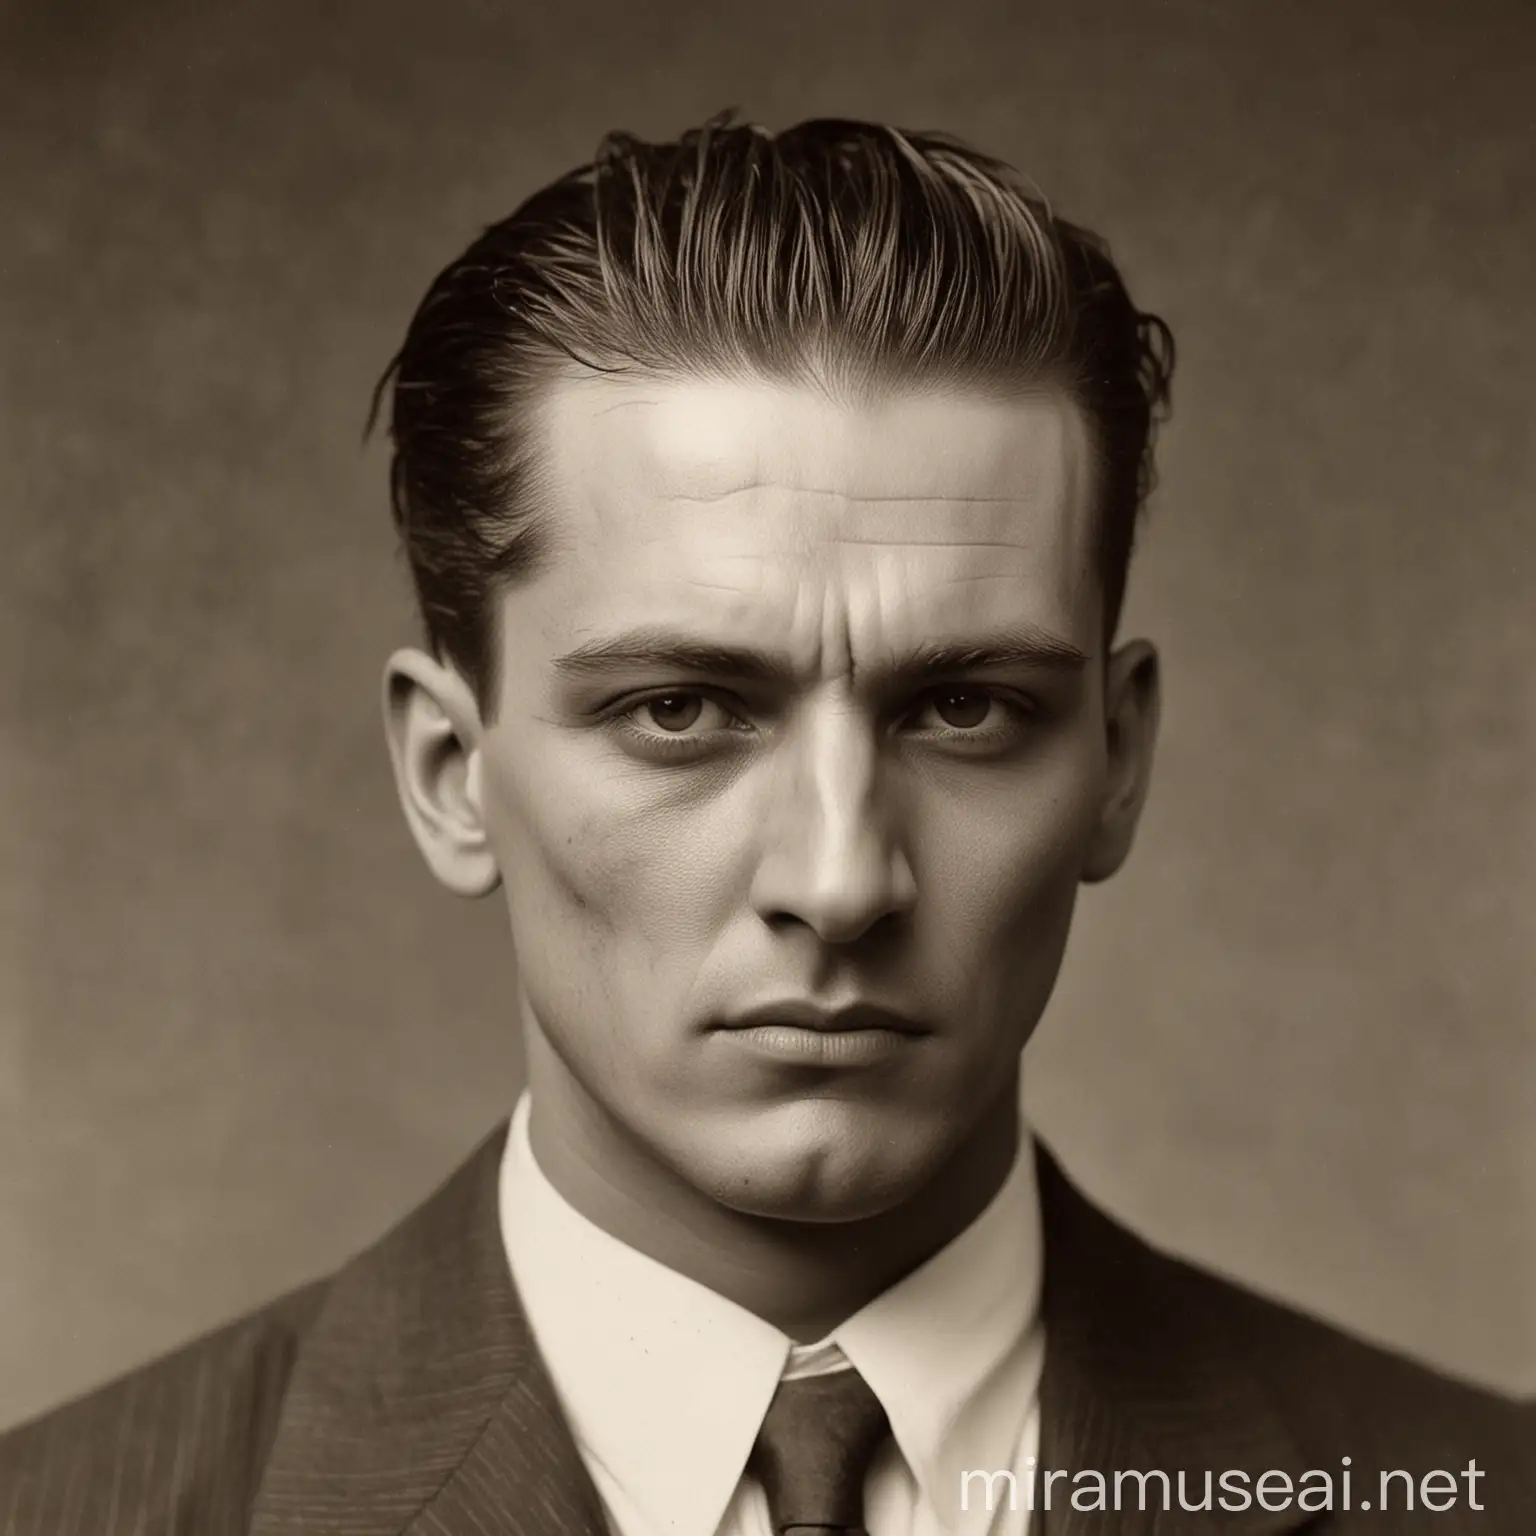 1920s Man with Slicked Back Hair and Facial Scar Portrait